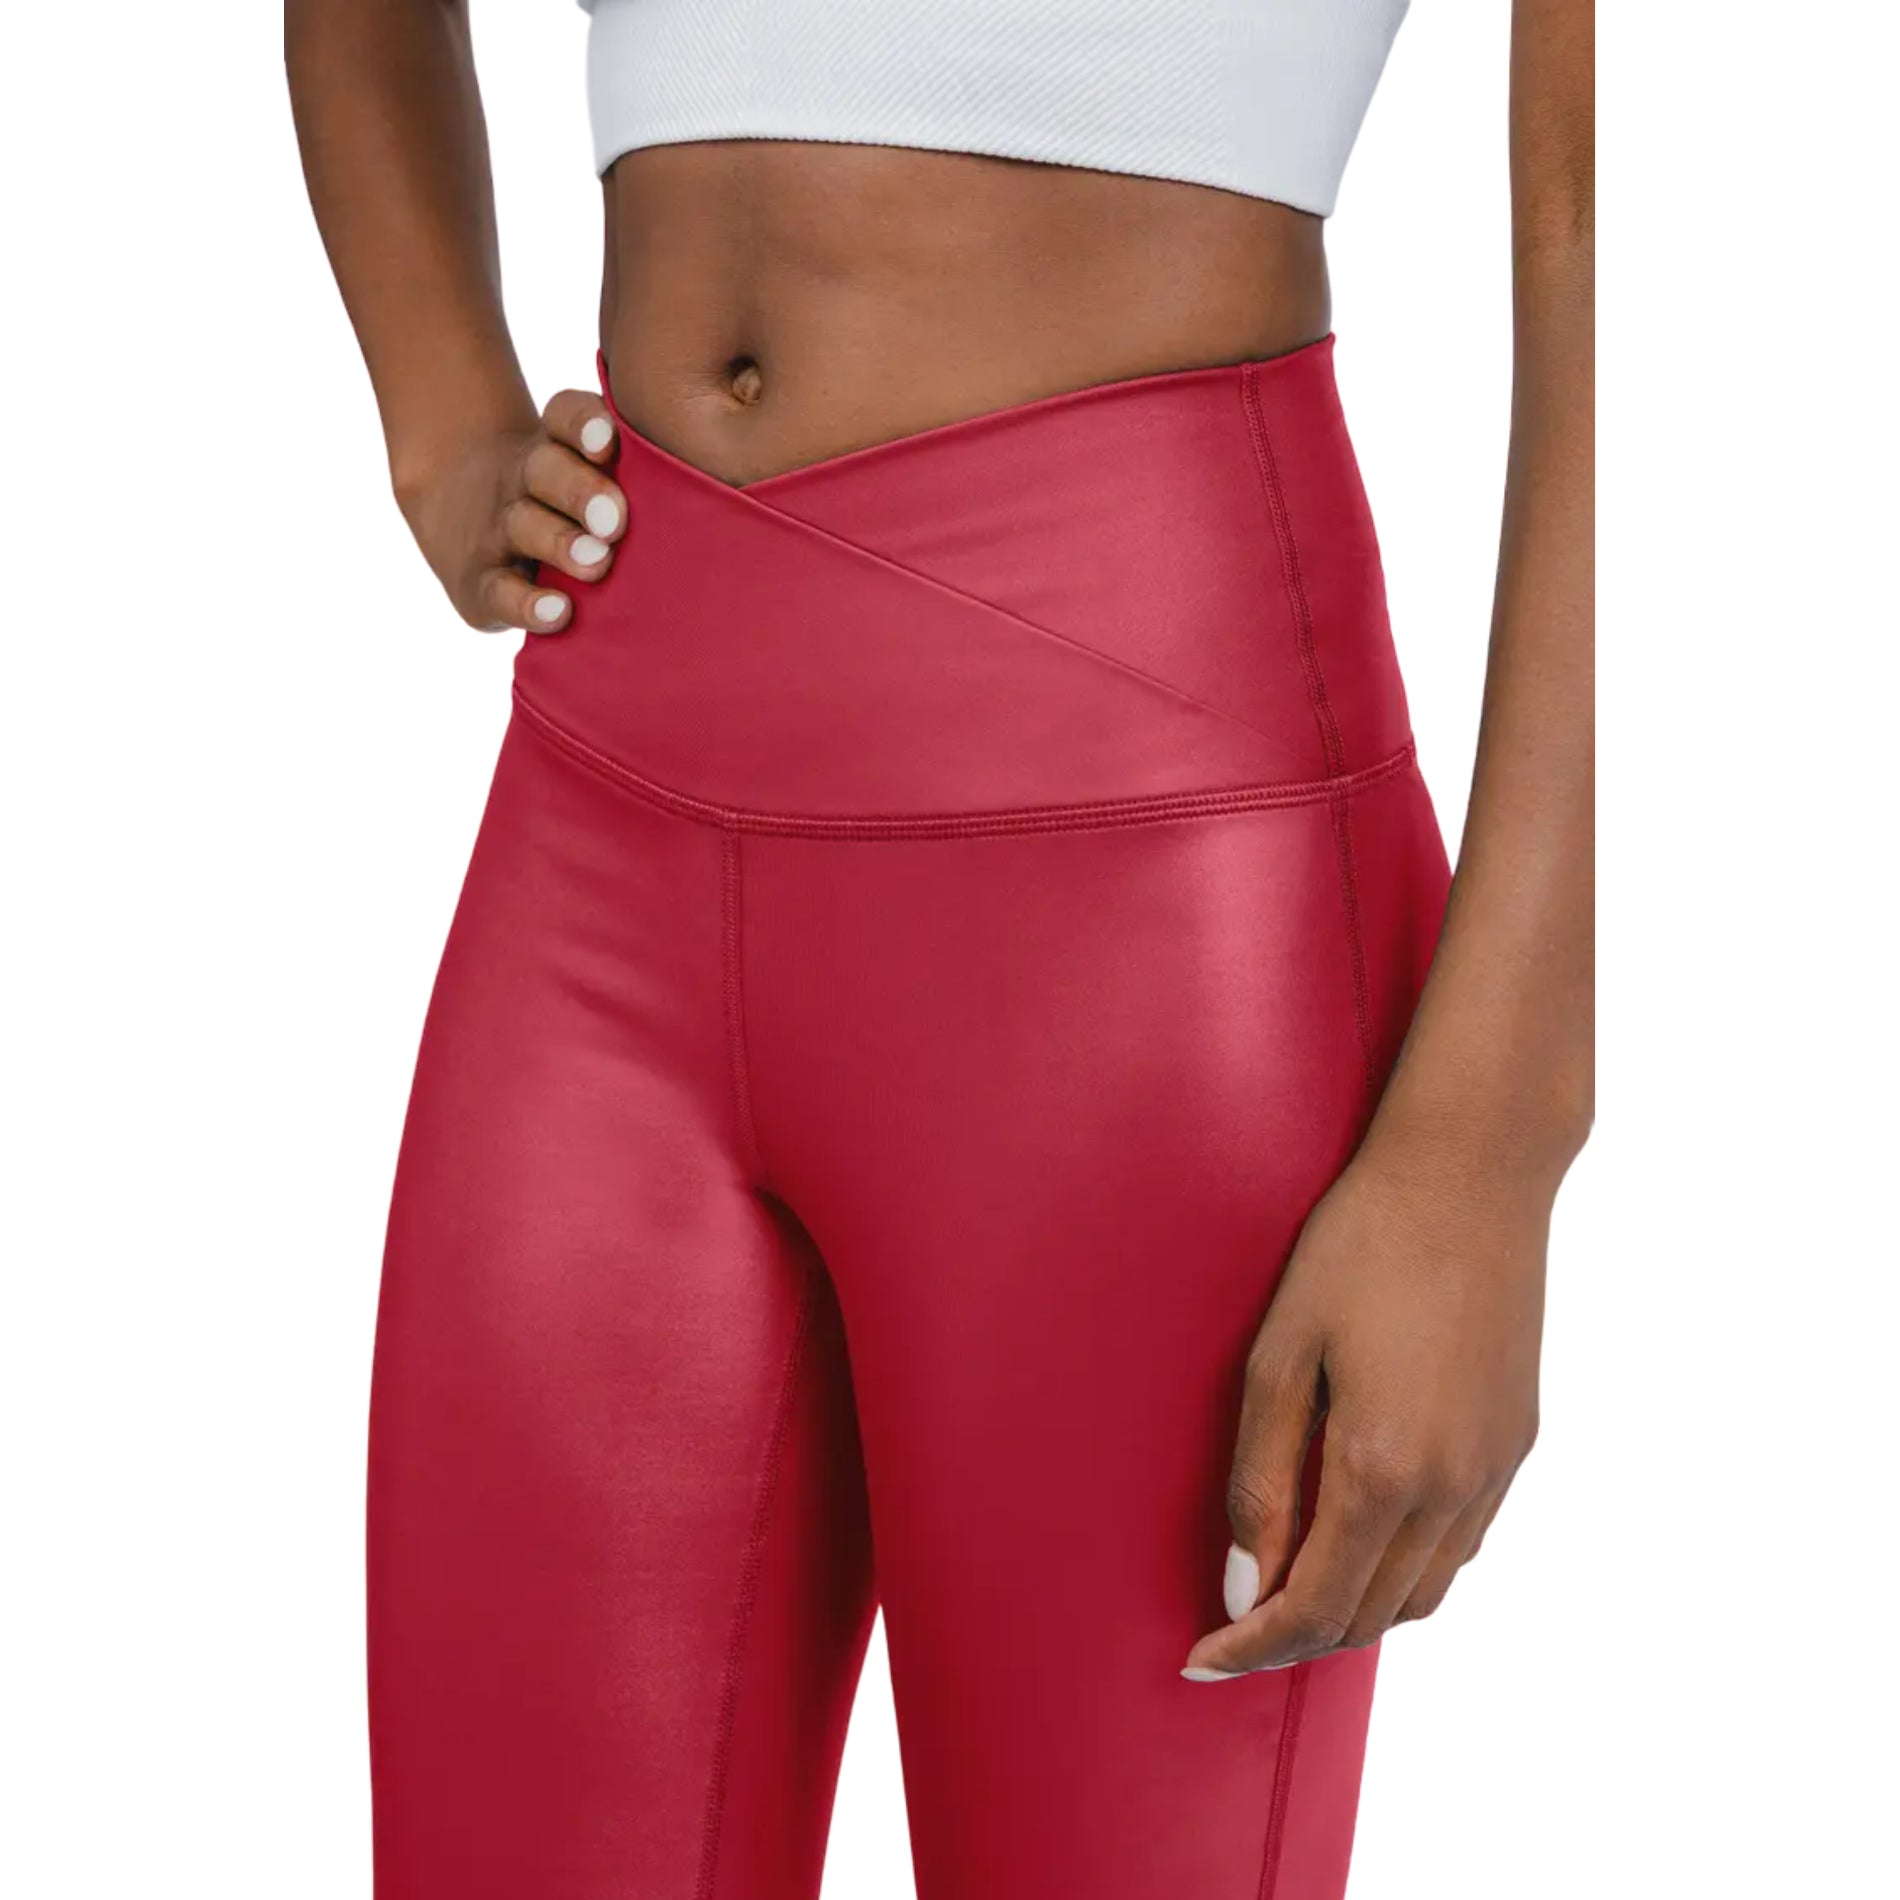 90 Degree By Reflex Women's Crossover Waistband Faux Leather